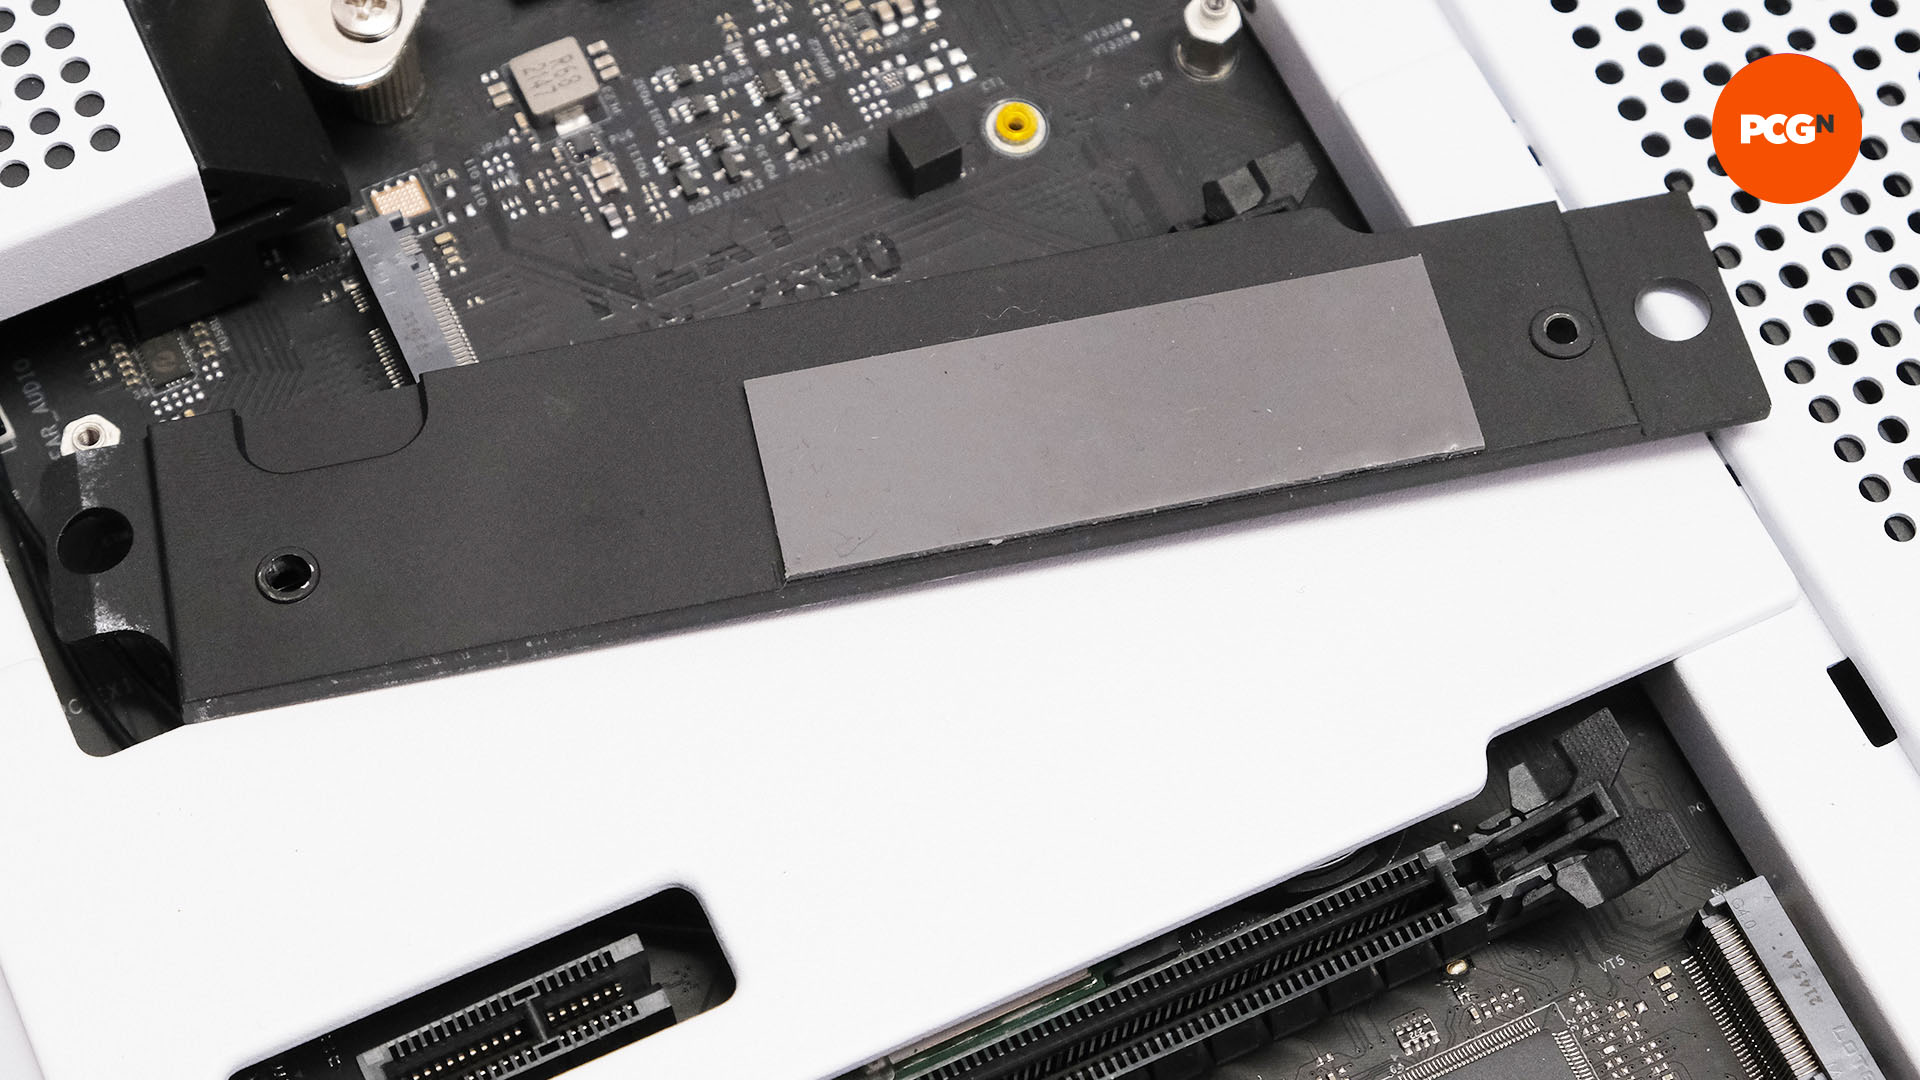 How to install an M.2 SSD: Remove heatsink from motherboard